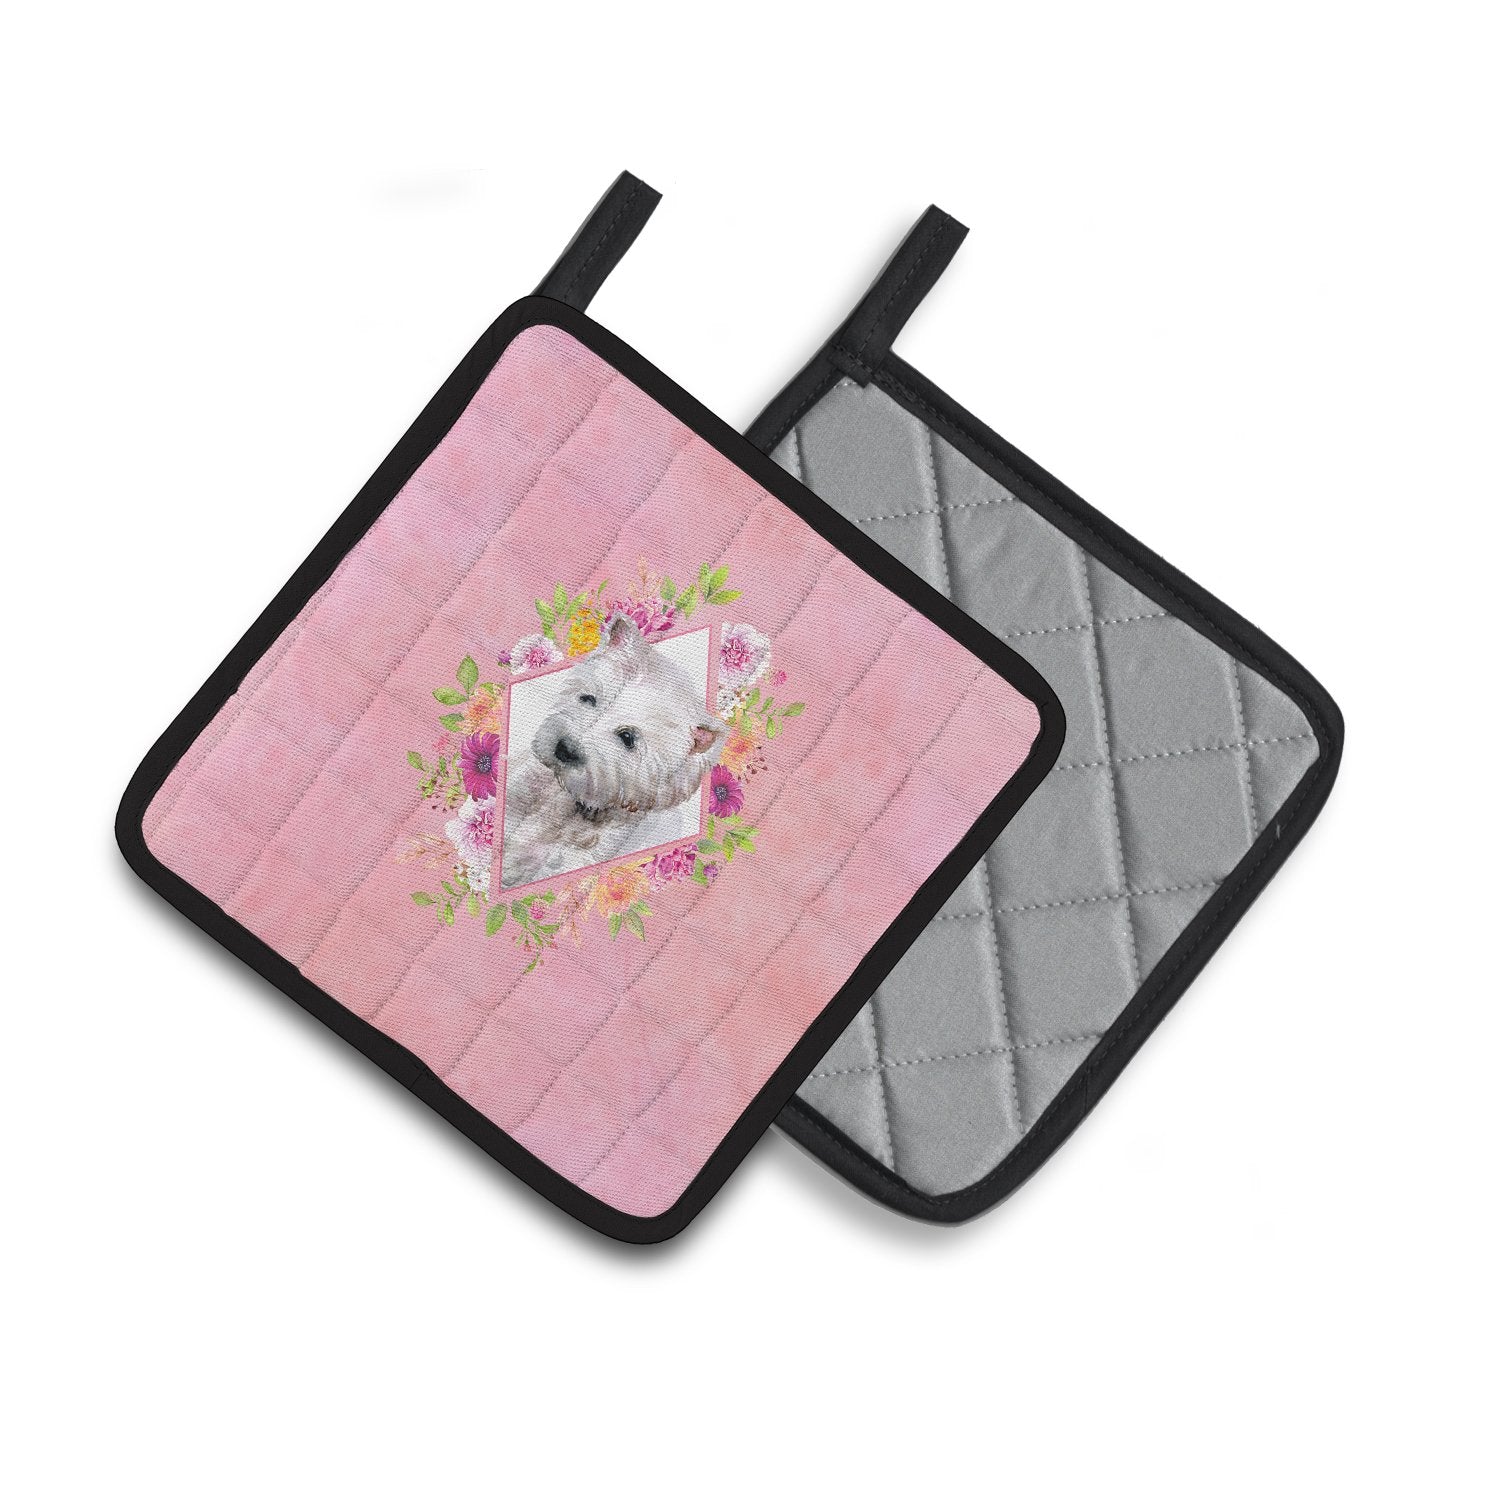 West Highland White Terrier Pink Flowers Pair of Pot Holders CK4193PTHD by Caroline's Treasures